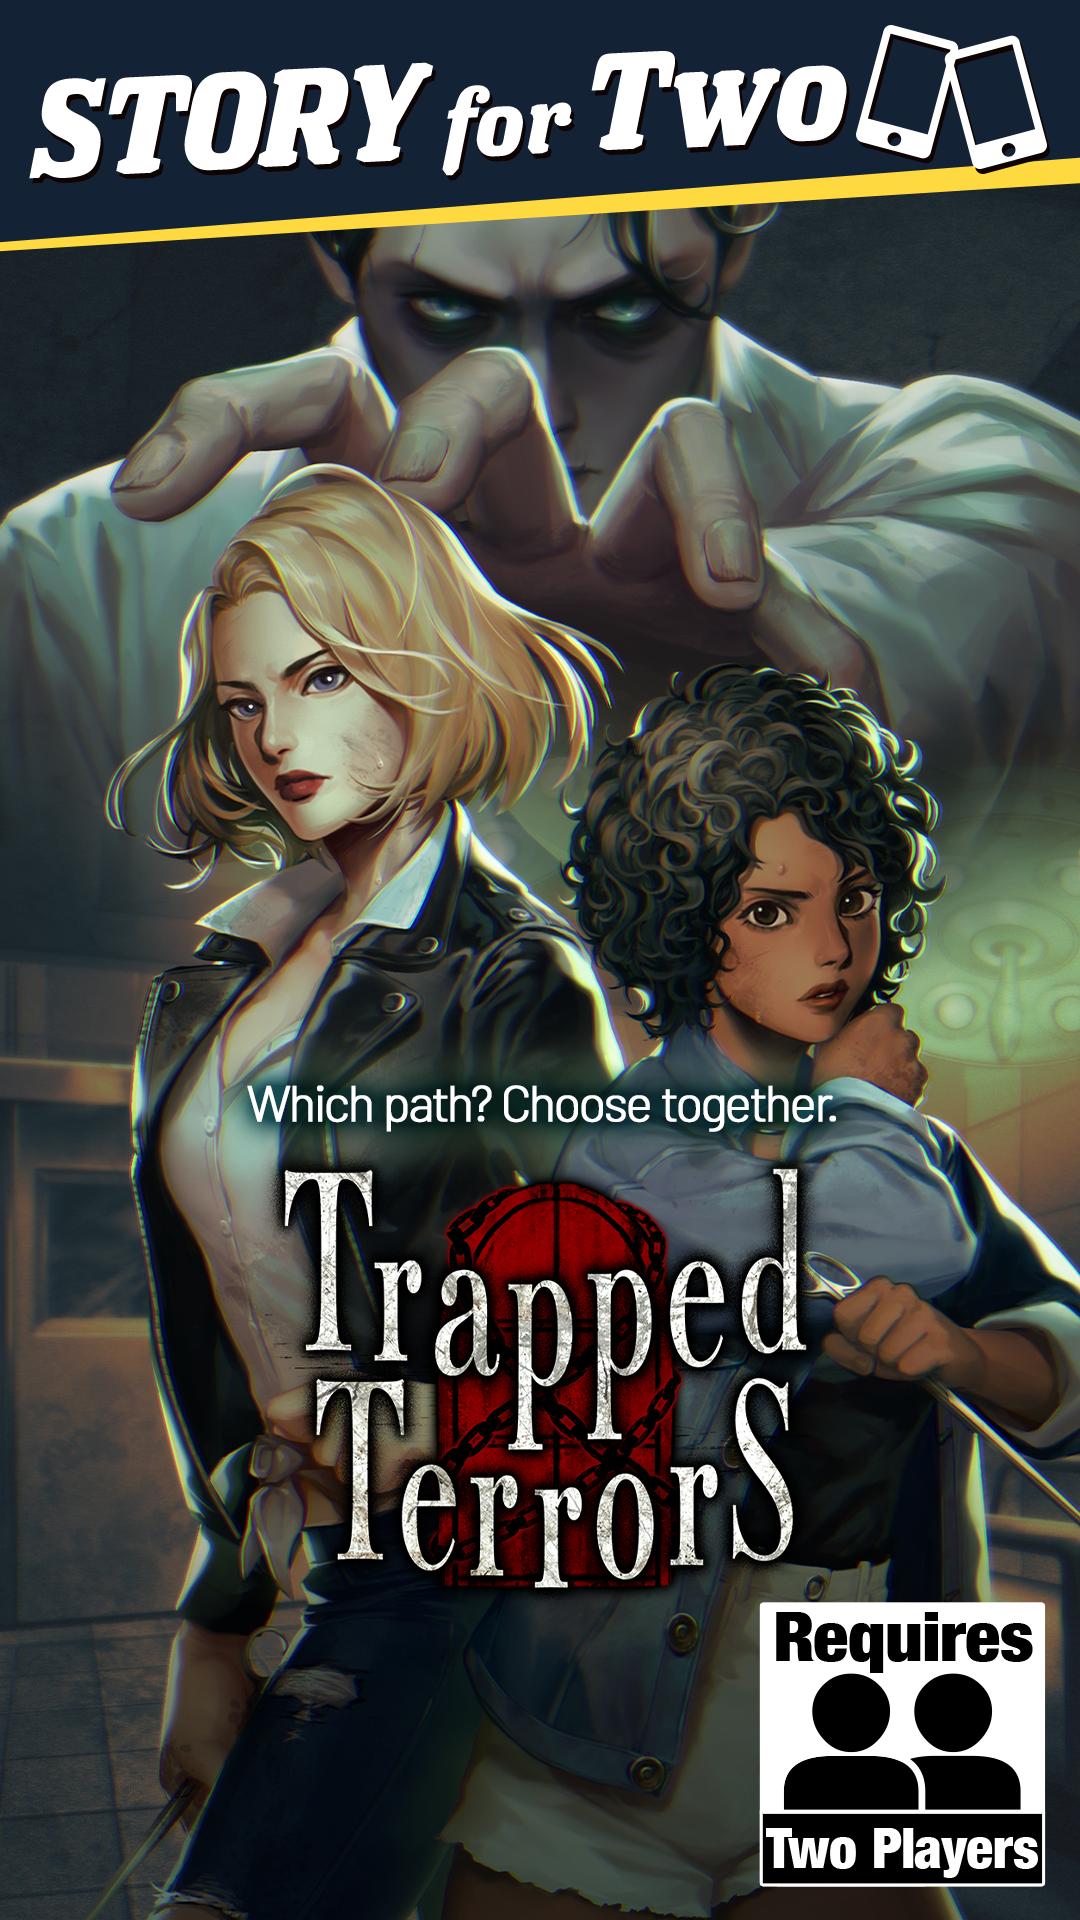 Trapped Terrors: A Story for Two 1.0.0 Screenshot 13